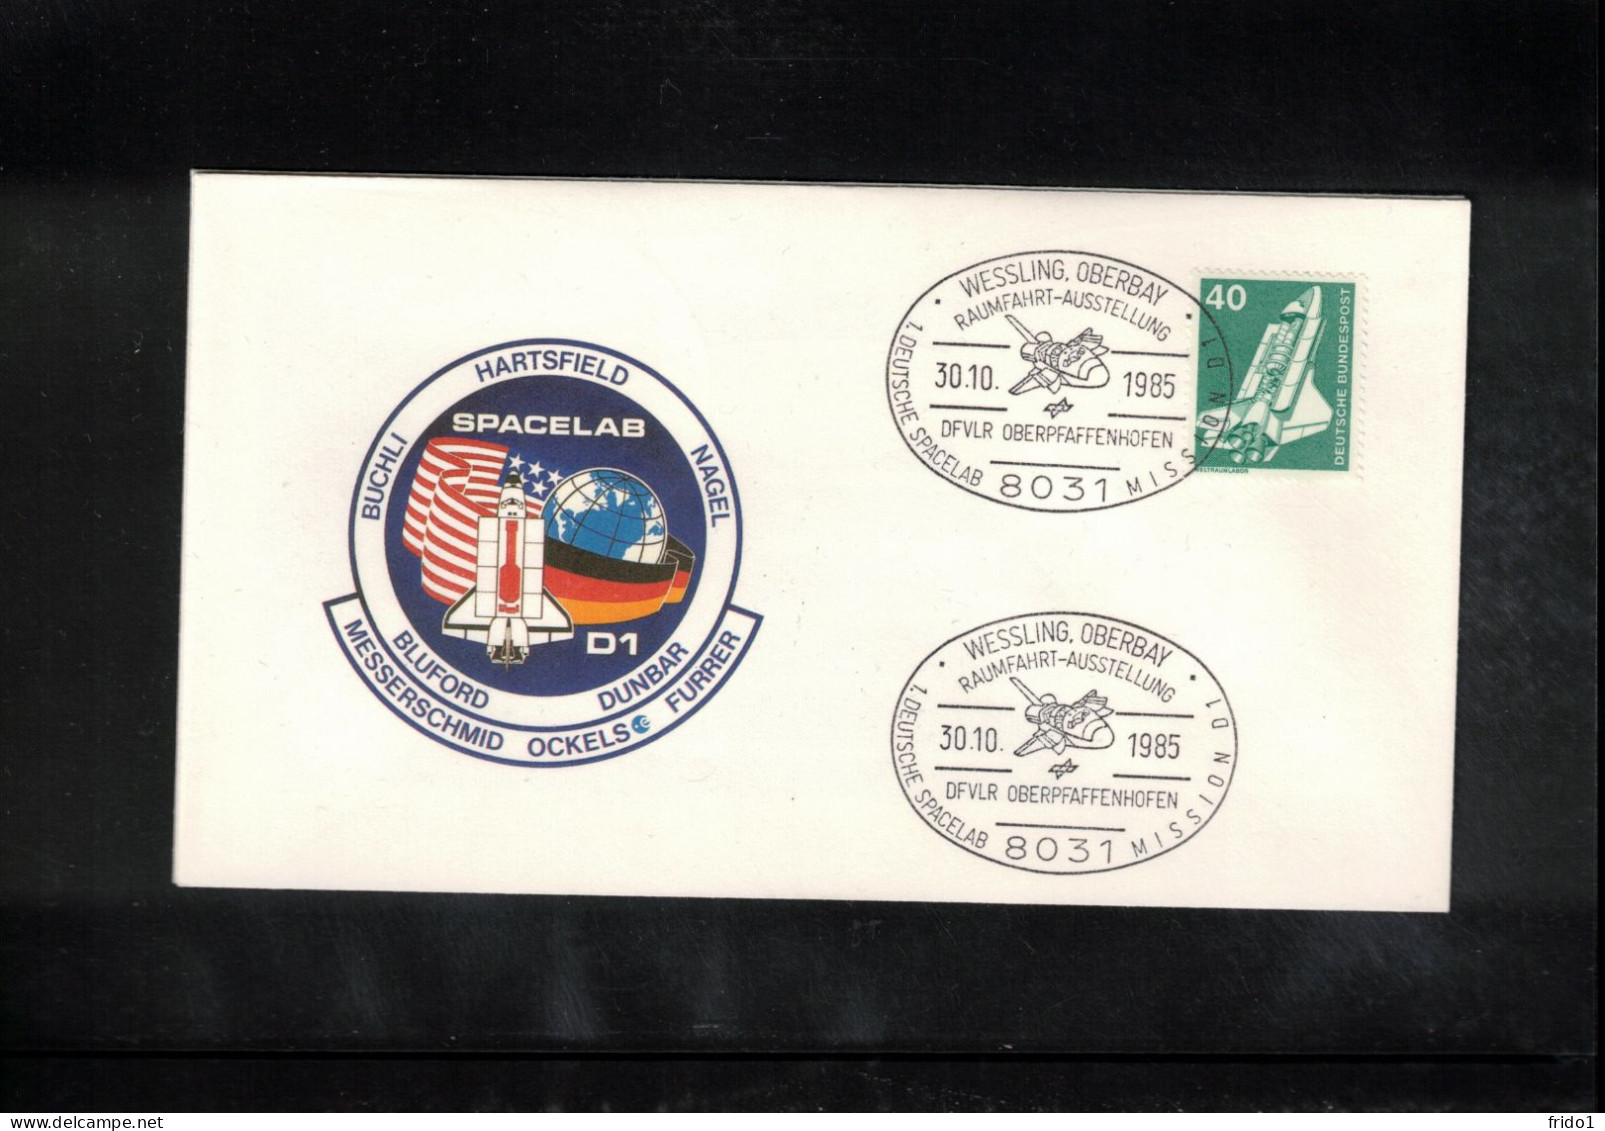 USA + Germany 1985 Space / Weltraum Space Shuttle + Spacelab D1 Interesting Cover - Etats-Unis